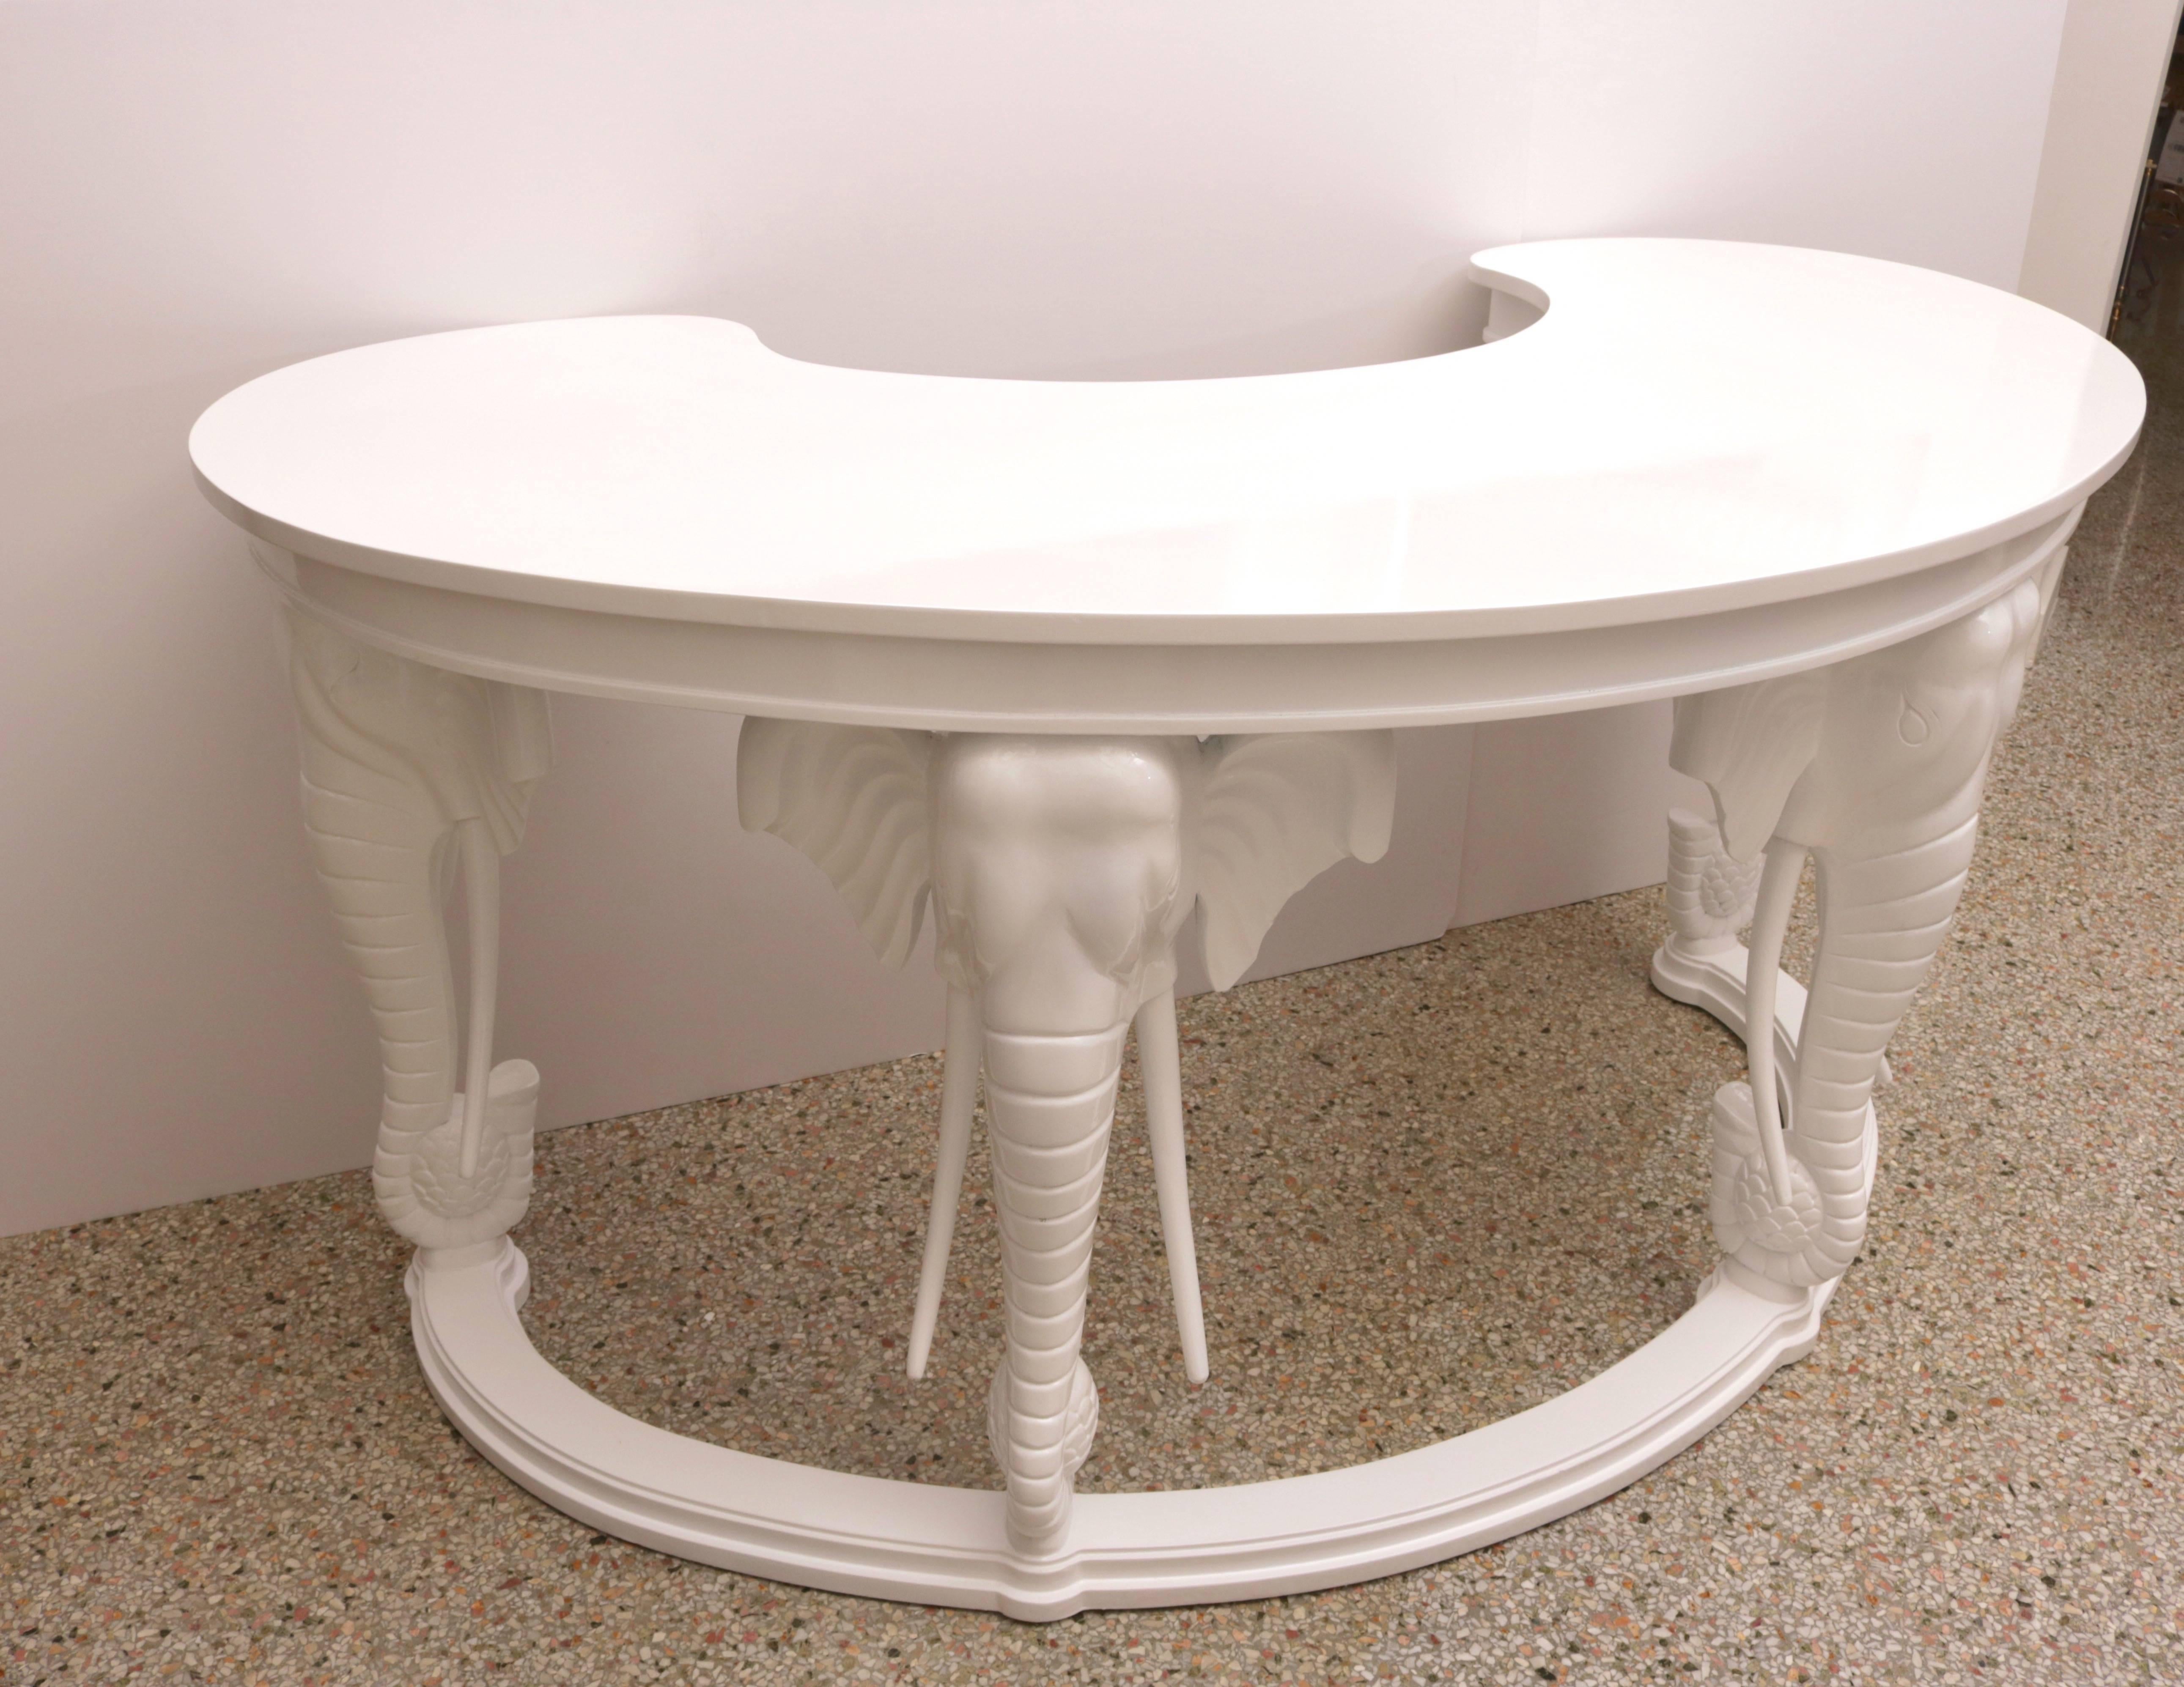 Hollywood-Regency style kidney-shaped, elephant motif desk in white by Gampel Stoll and has been professionally lacquered in white and will make the perfect statement piece in you home.

Please feel free to contact us directly for a shipping quote